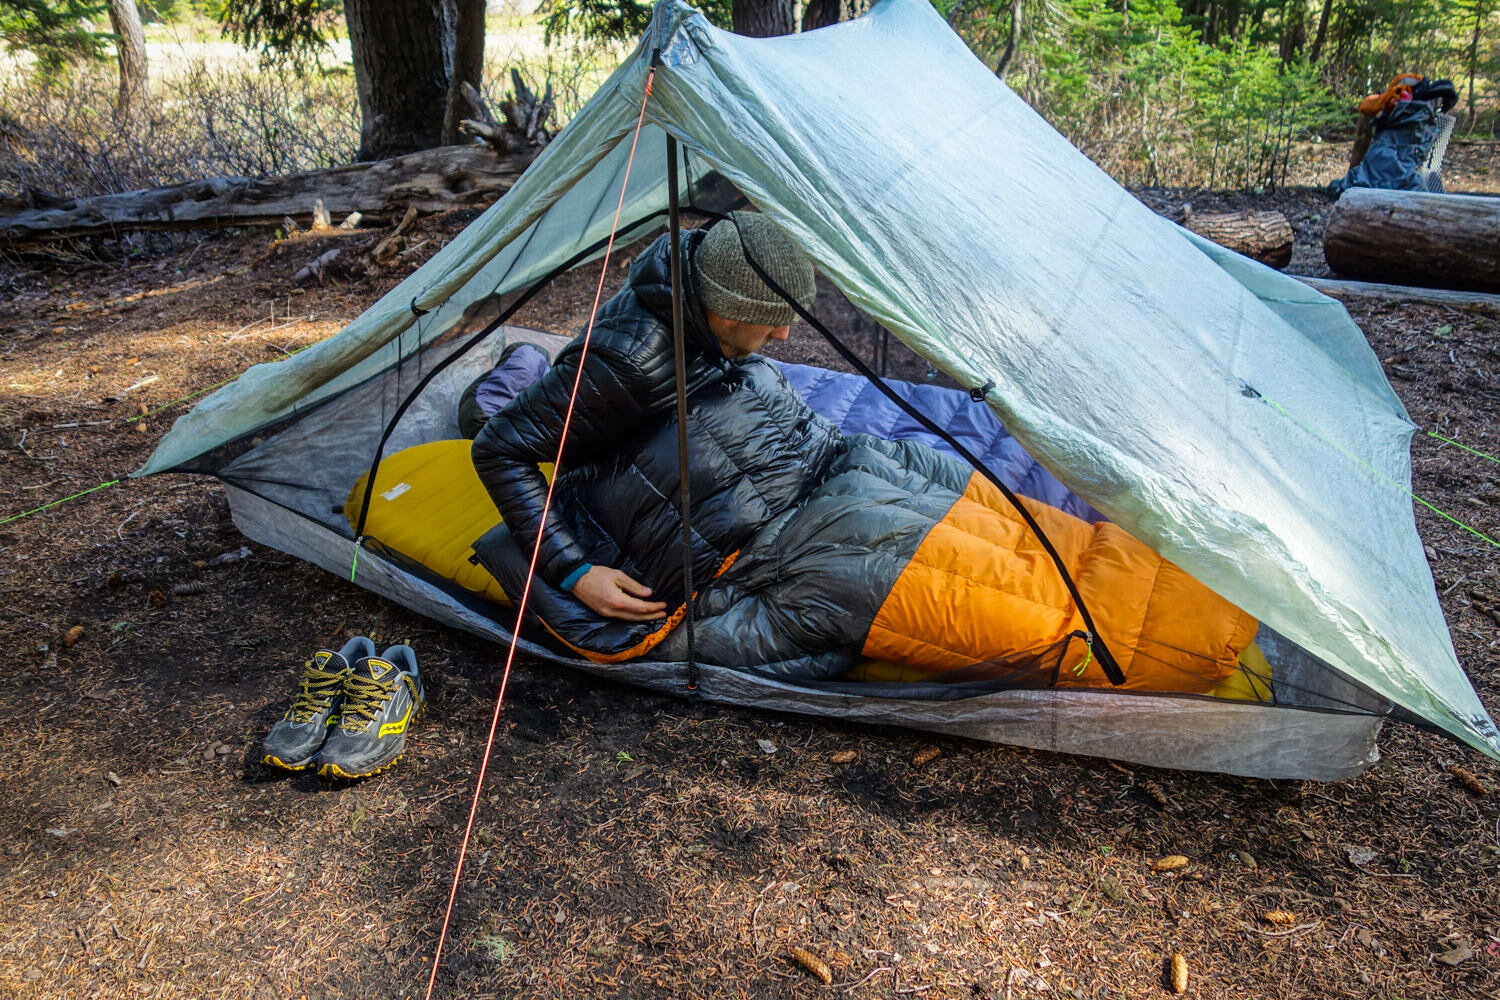 The therm-a-rest neoair xlite is great for adding a little extra warmth on cooler spring/fall trips.